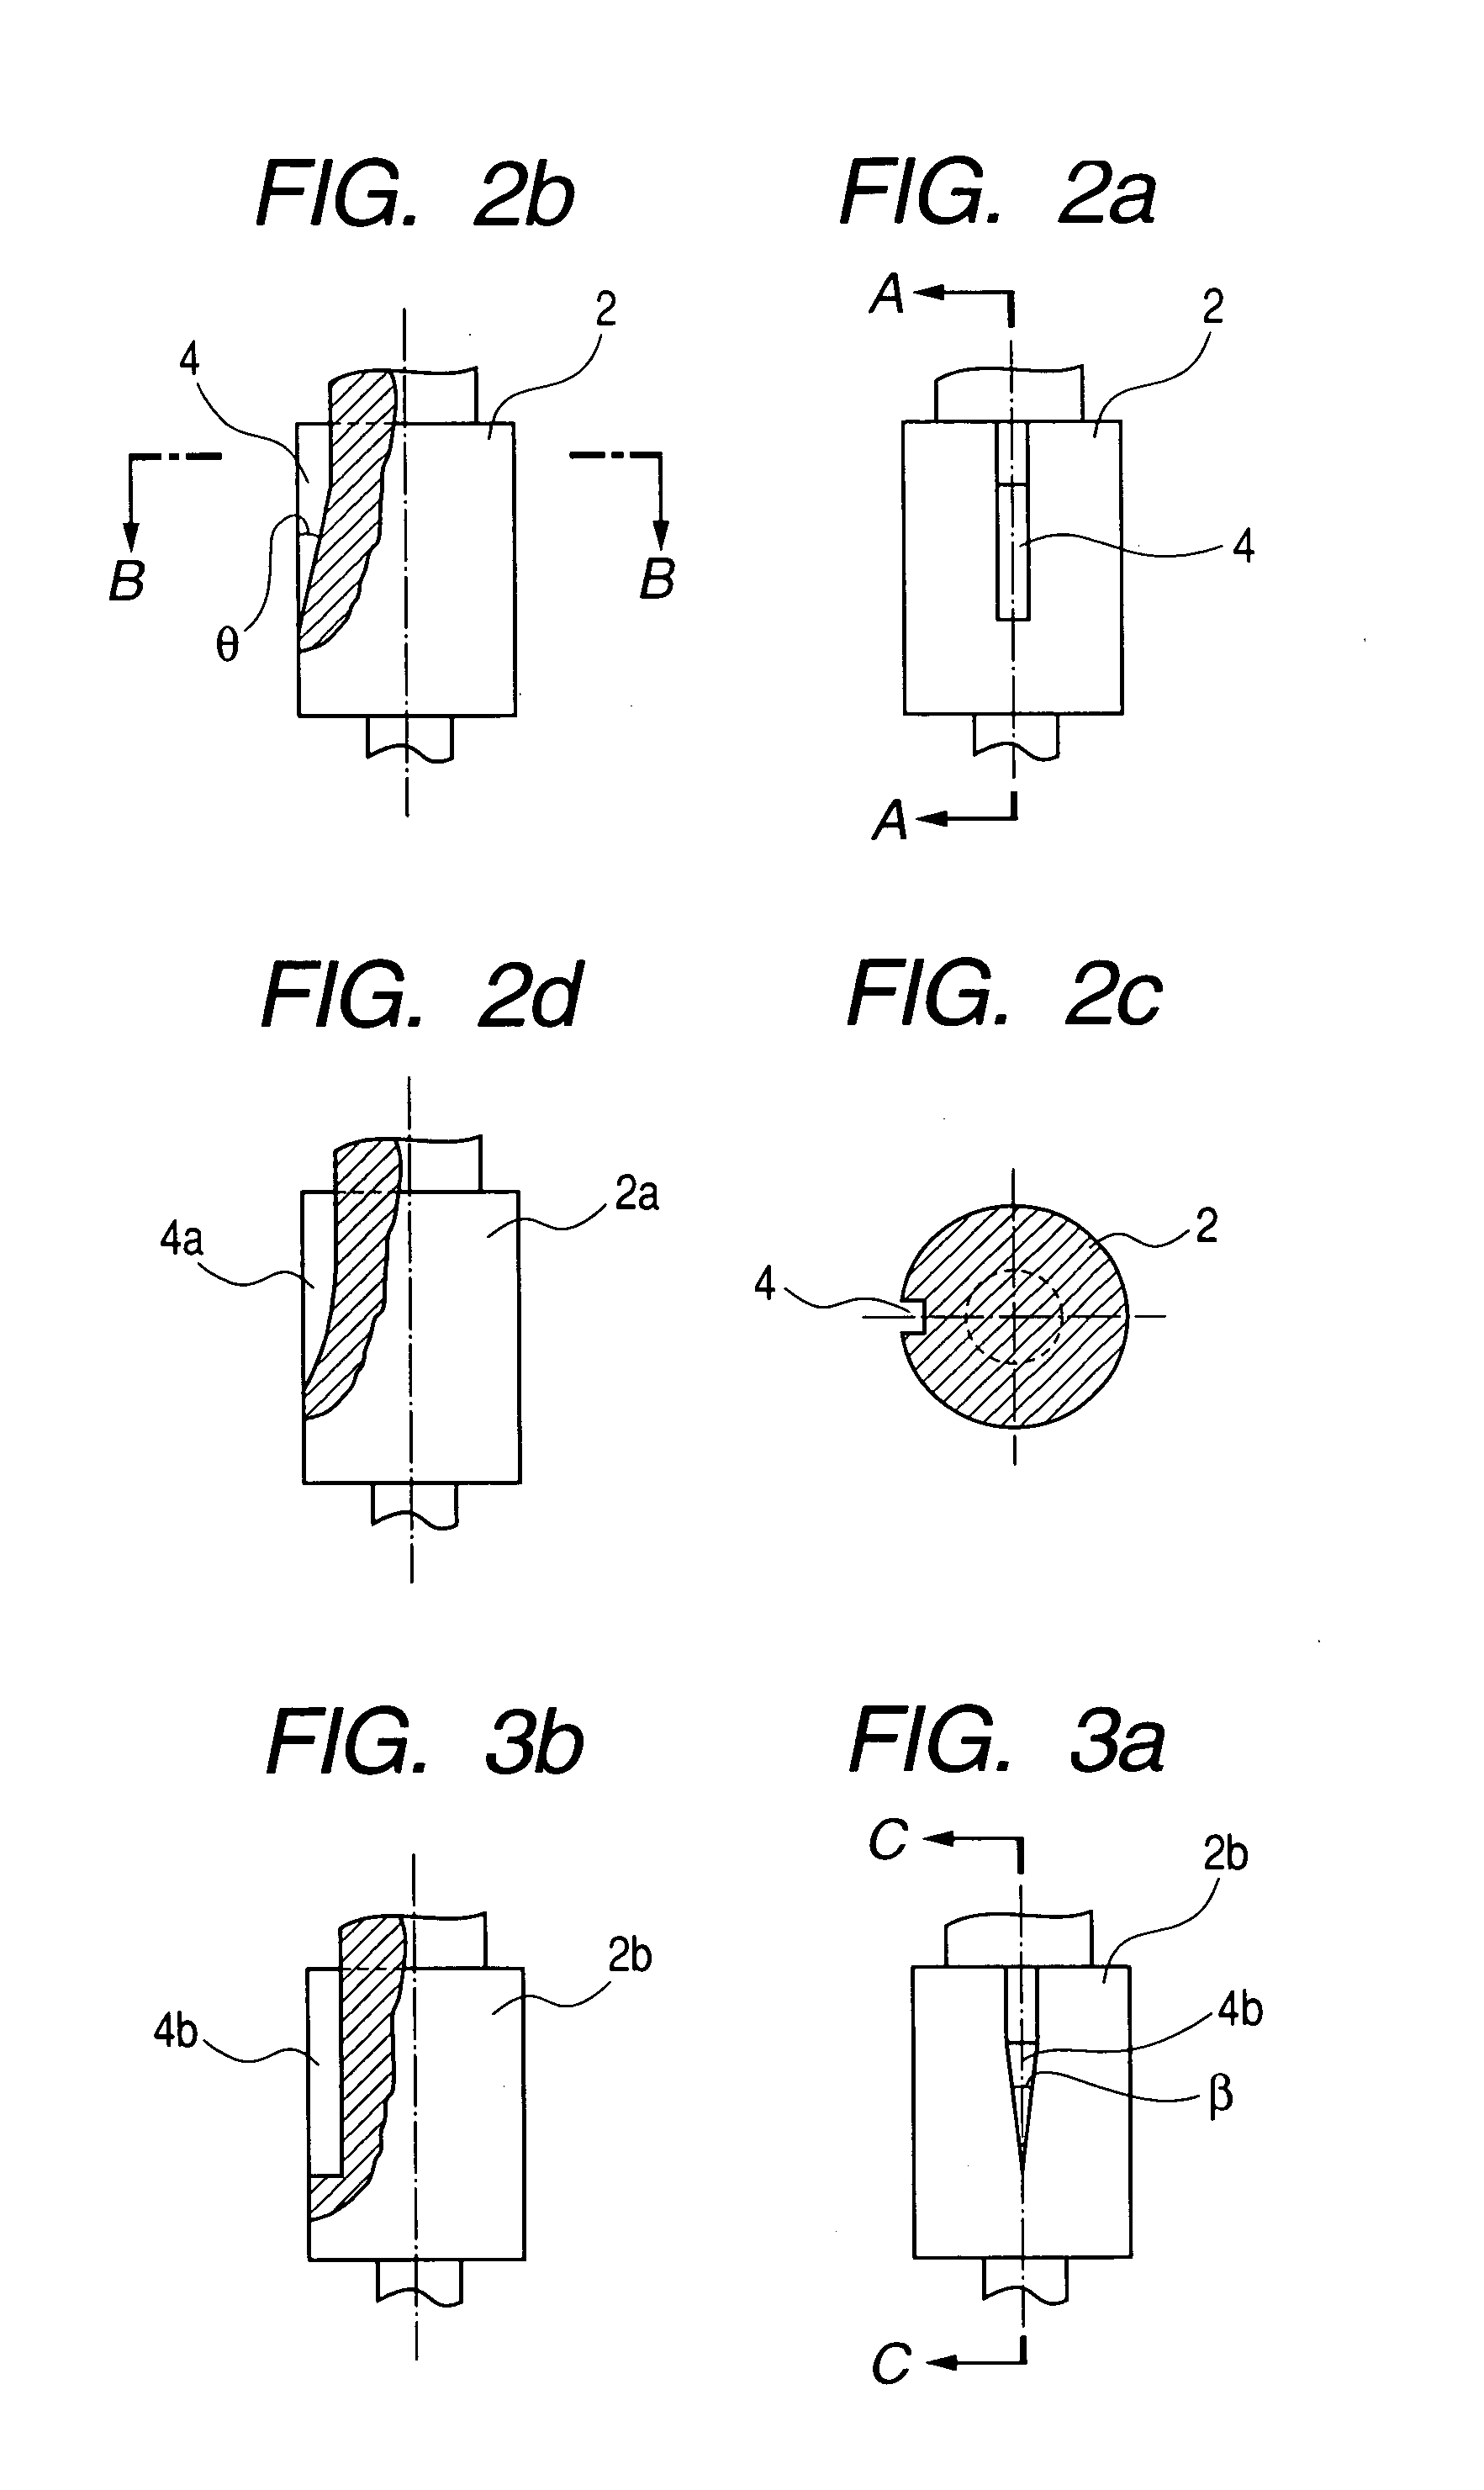 Variable valve system of internal combustion engine and hydraulic actuator